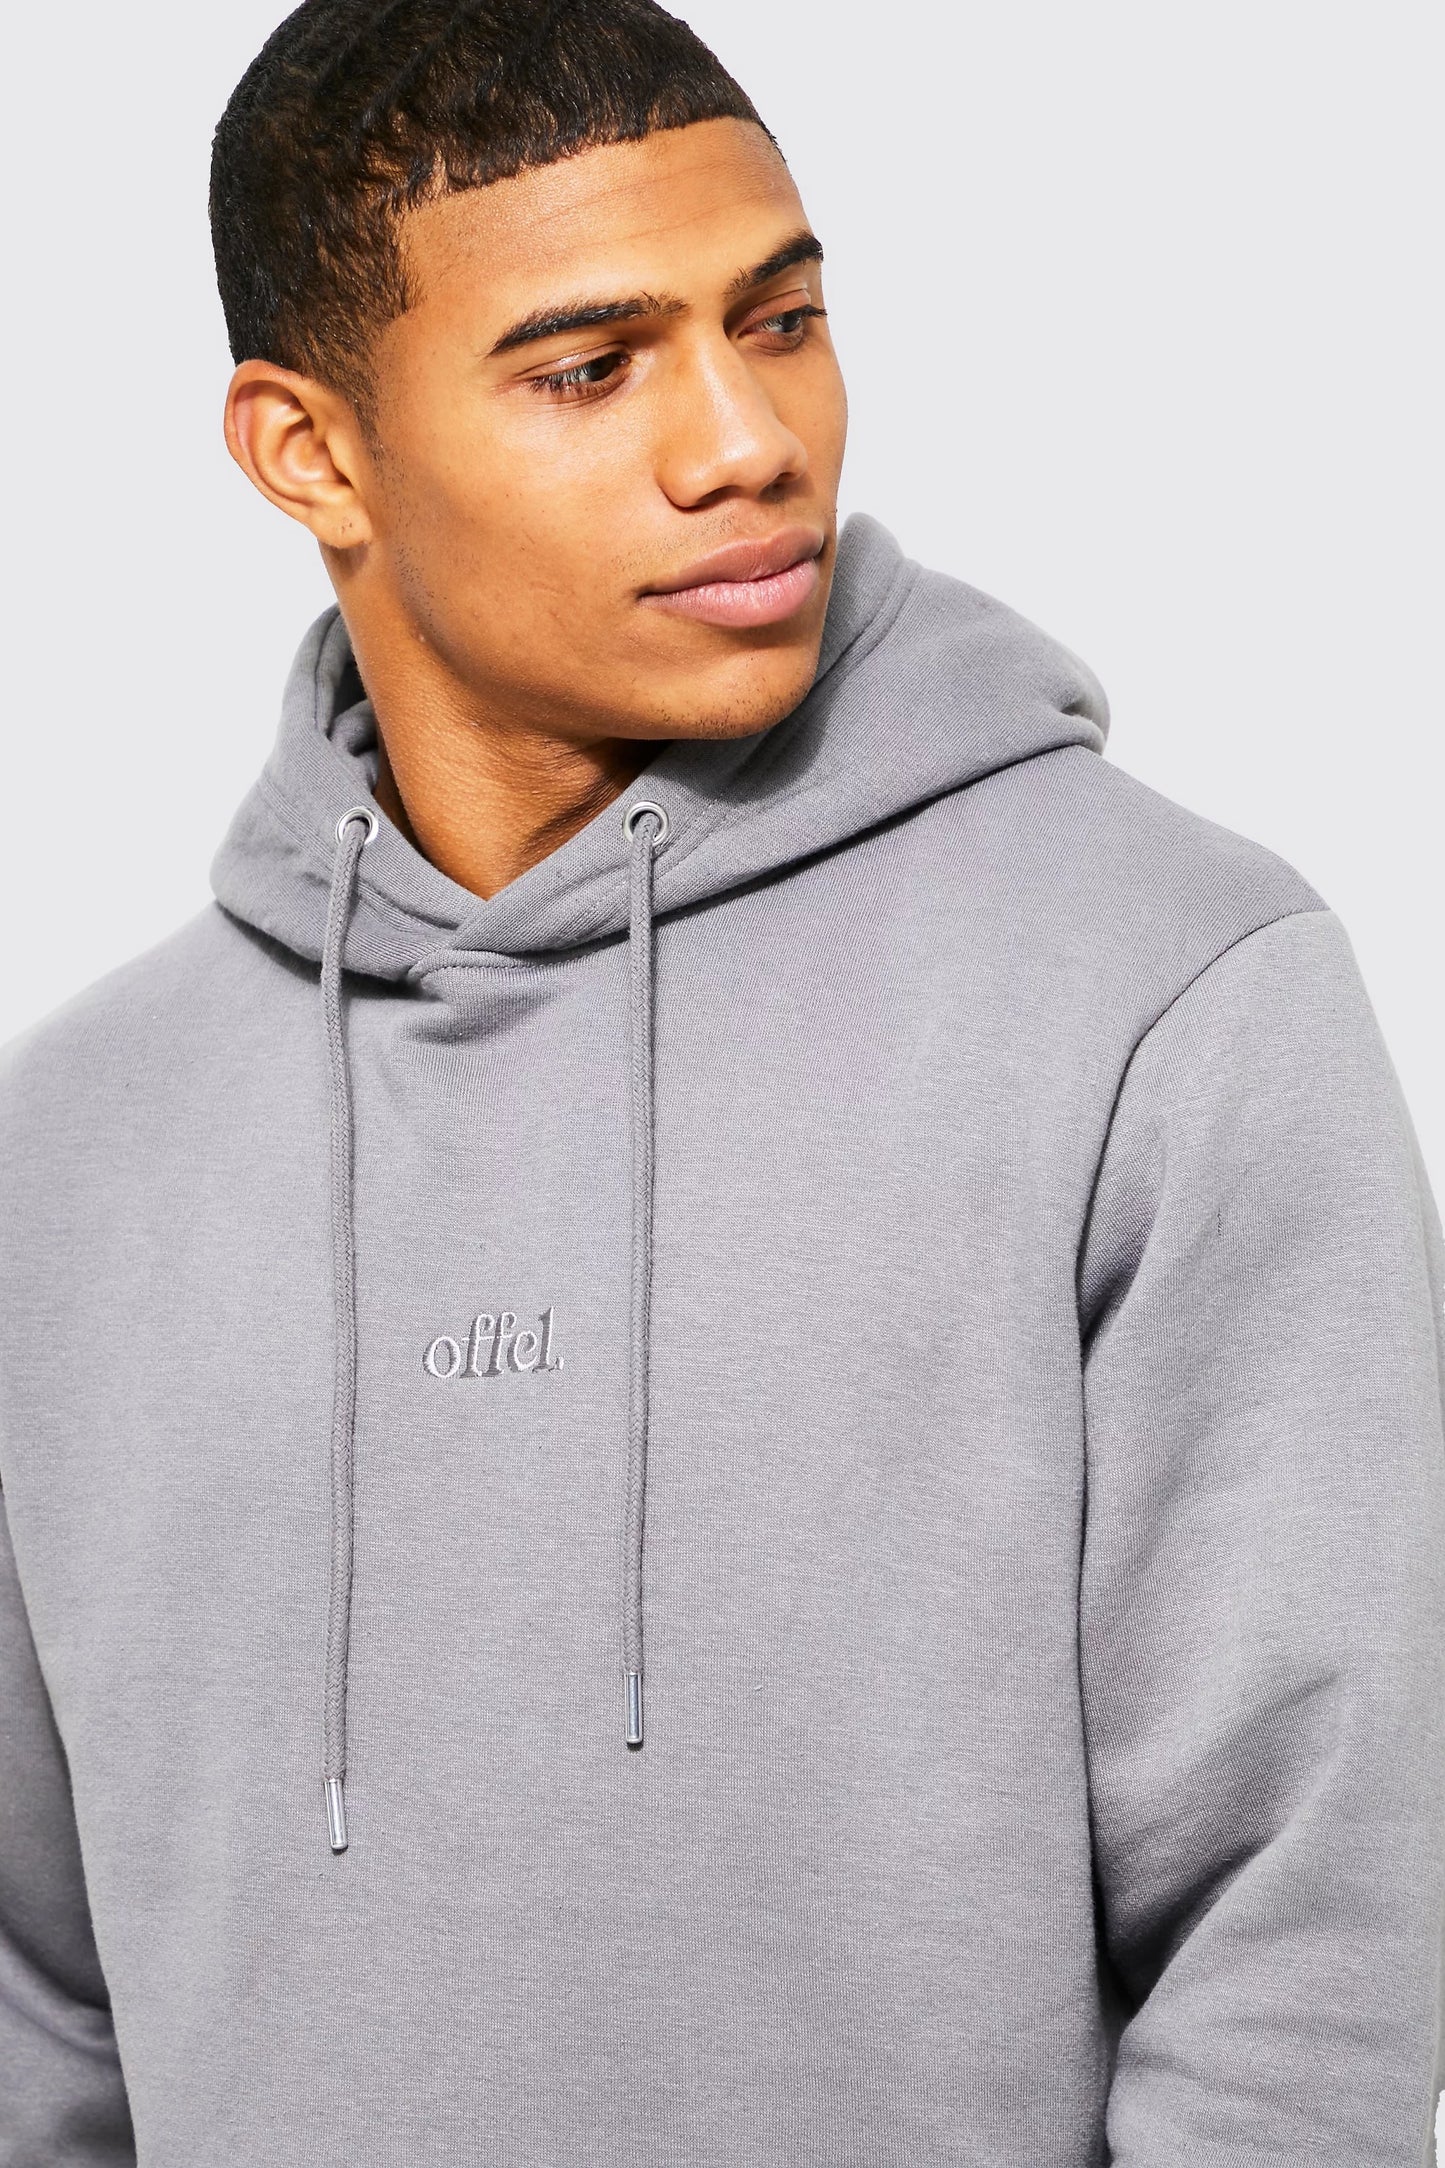 BOOHOOMAN OFFCL OVER THE HEAD HOODIE IN CHARCOAL